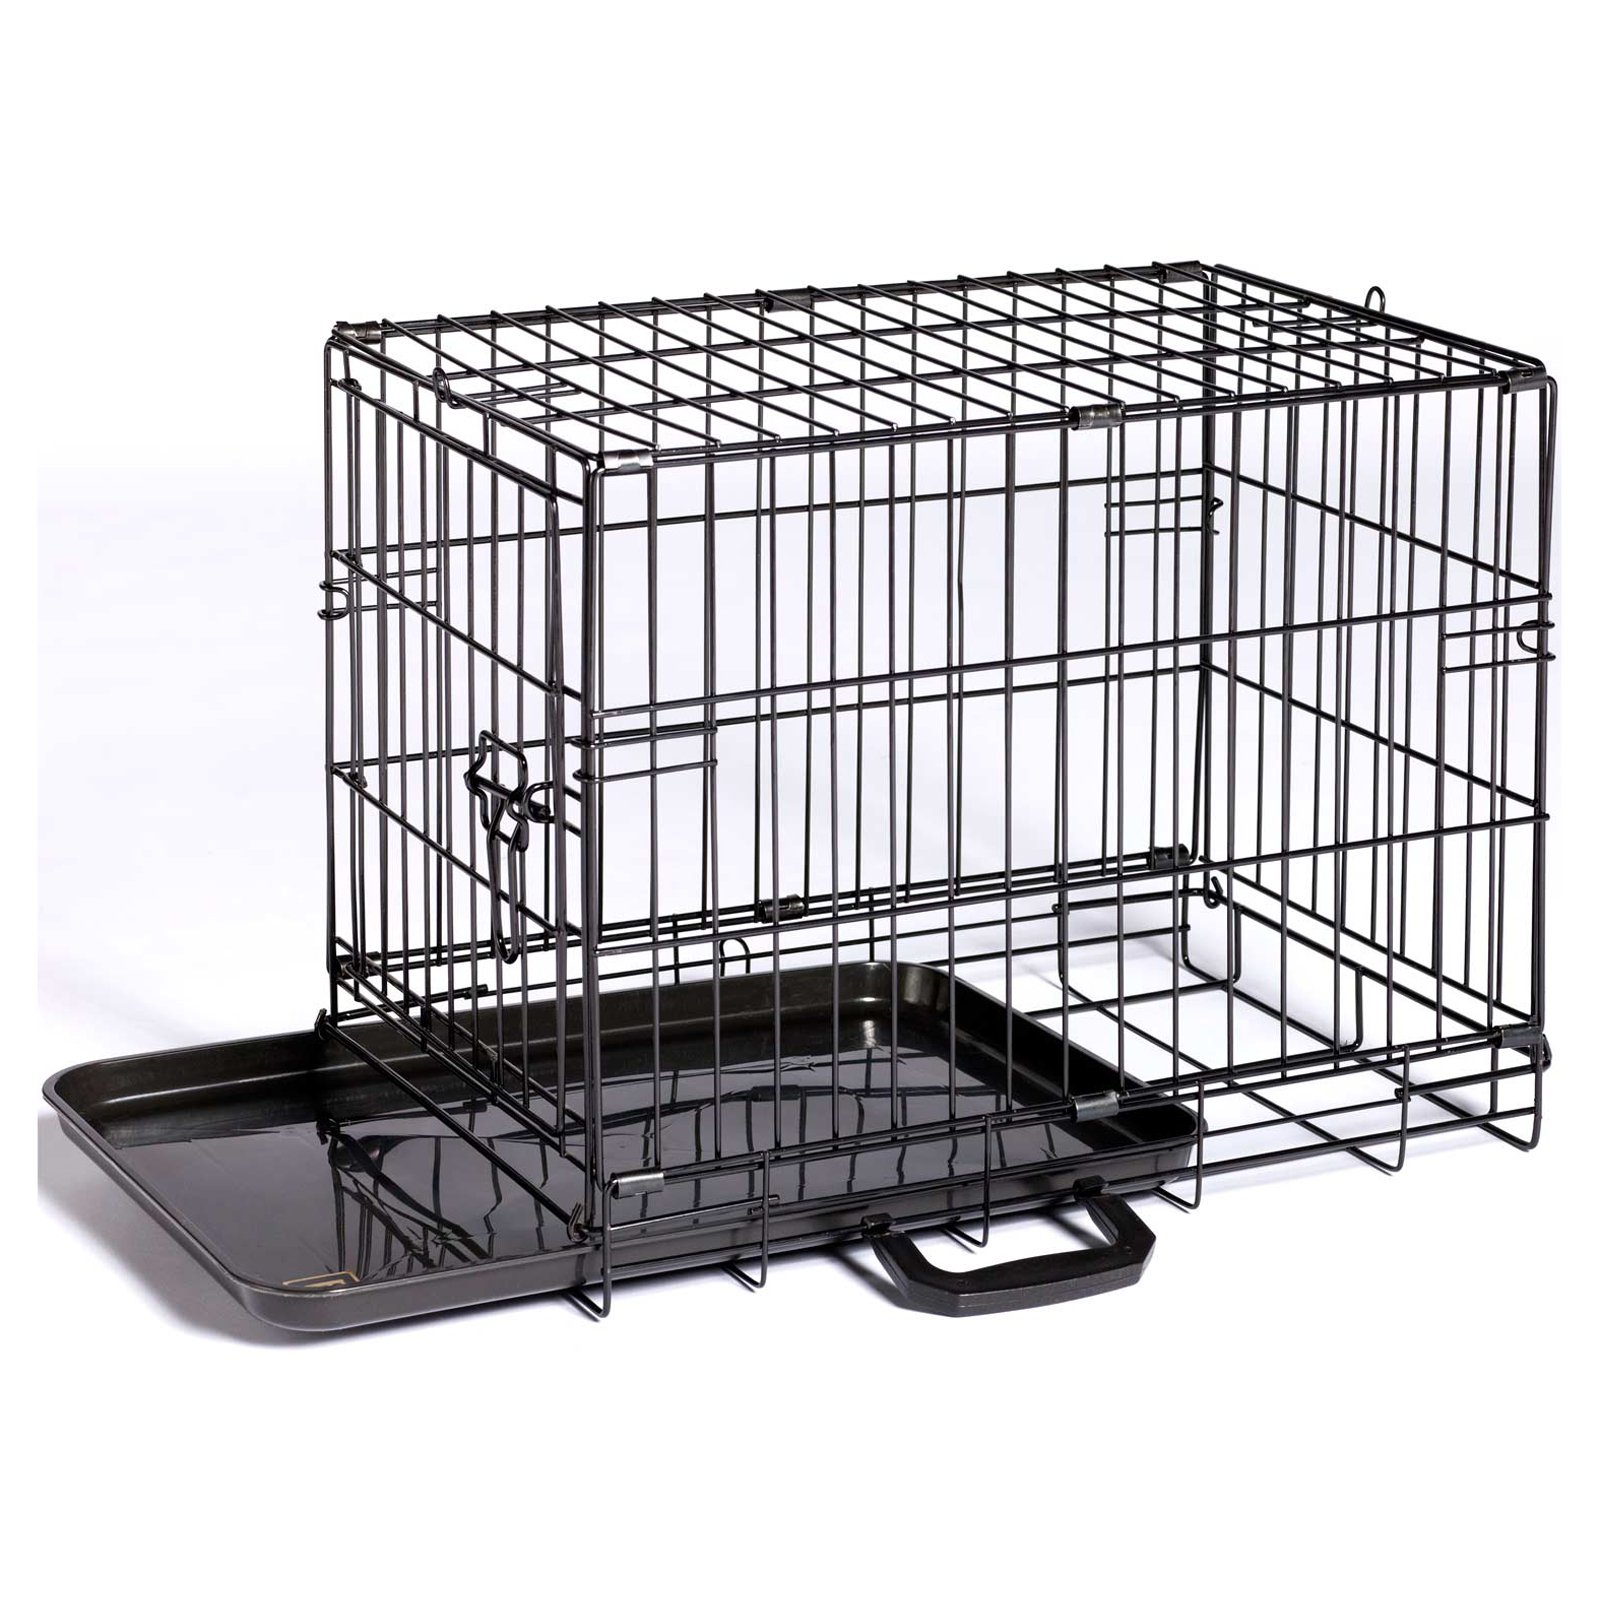 Prevue Pet Products Home On-The-Go Dog Crate, X-Small, 24"L x 16.50"W x 20"H - image 3 of 7